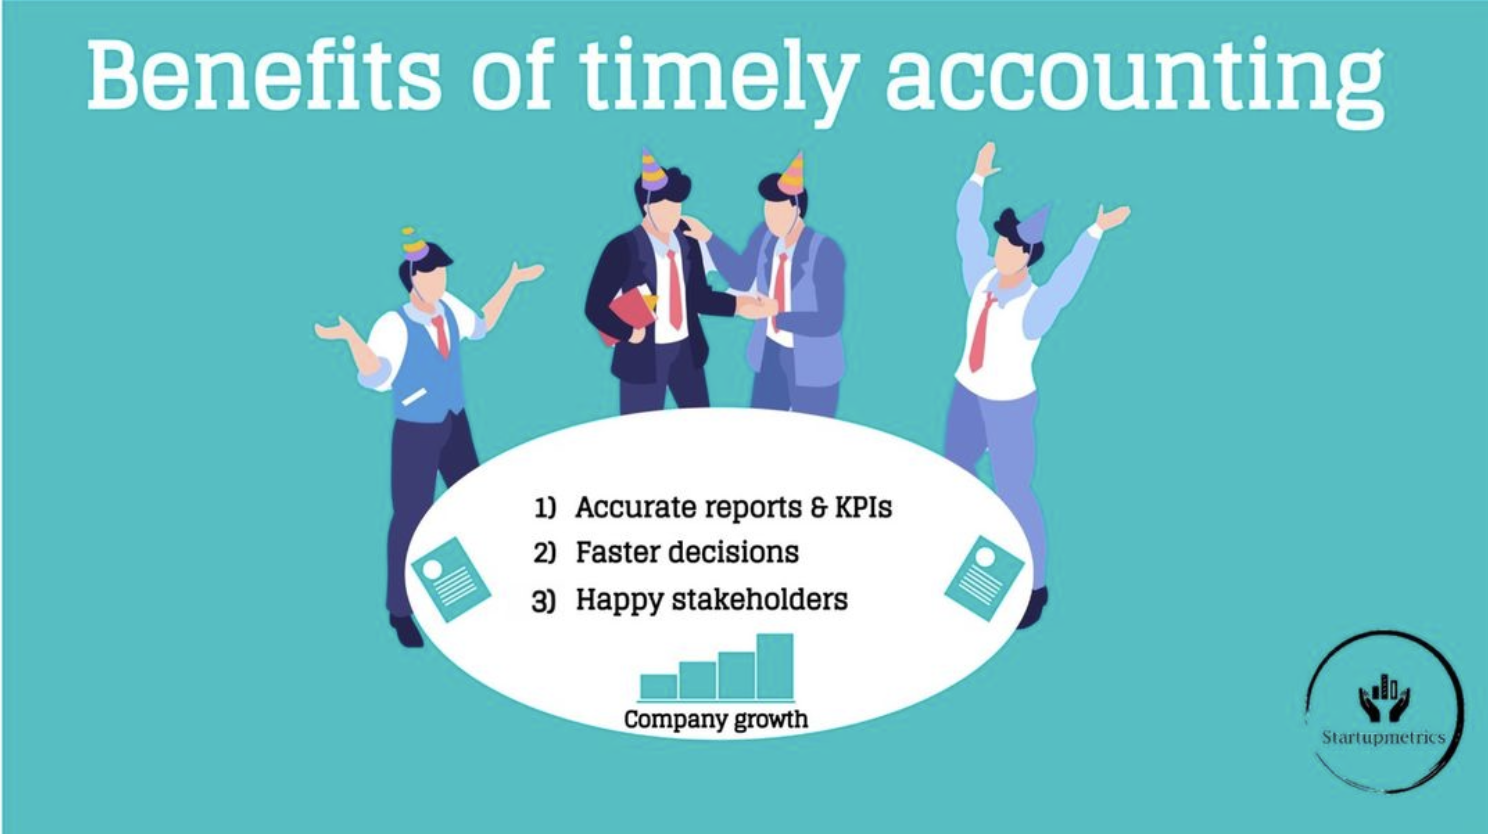 Benefits of timely accounting